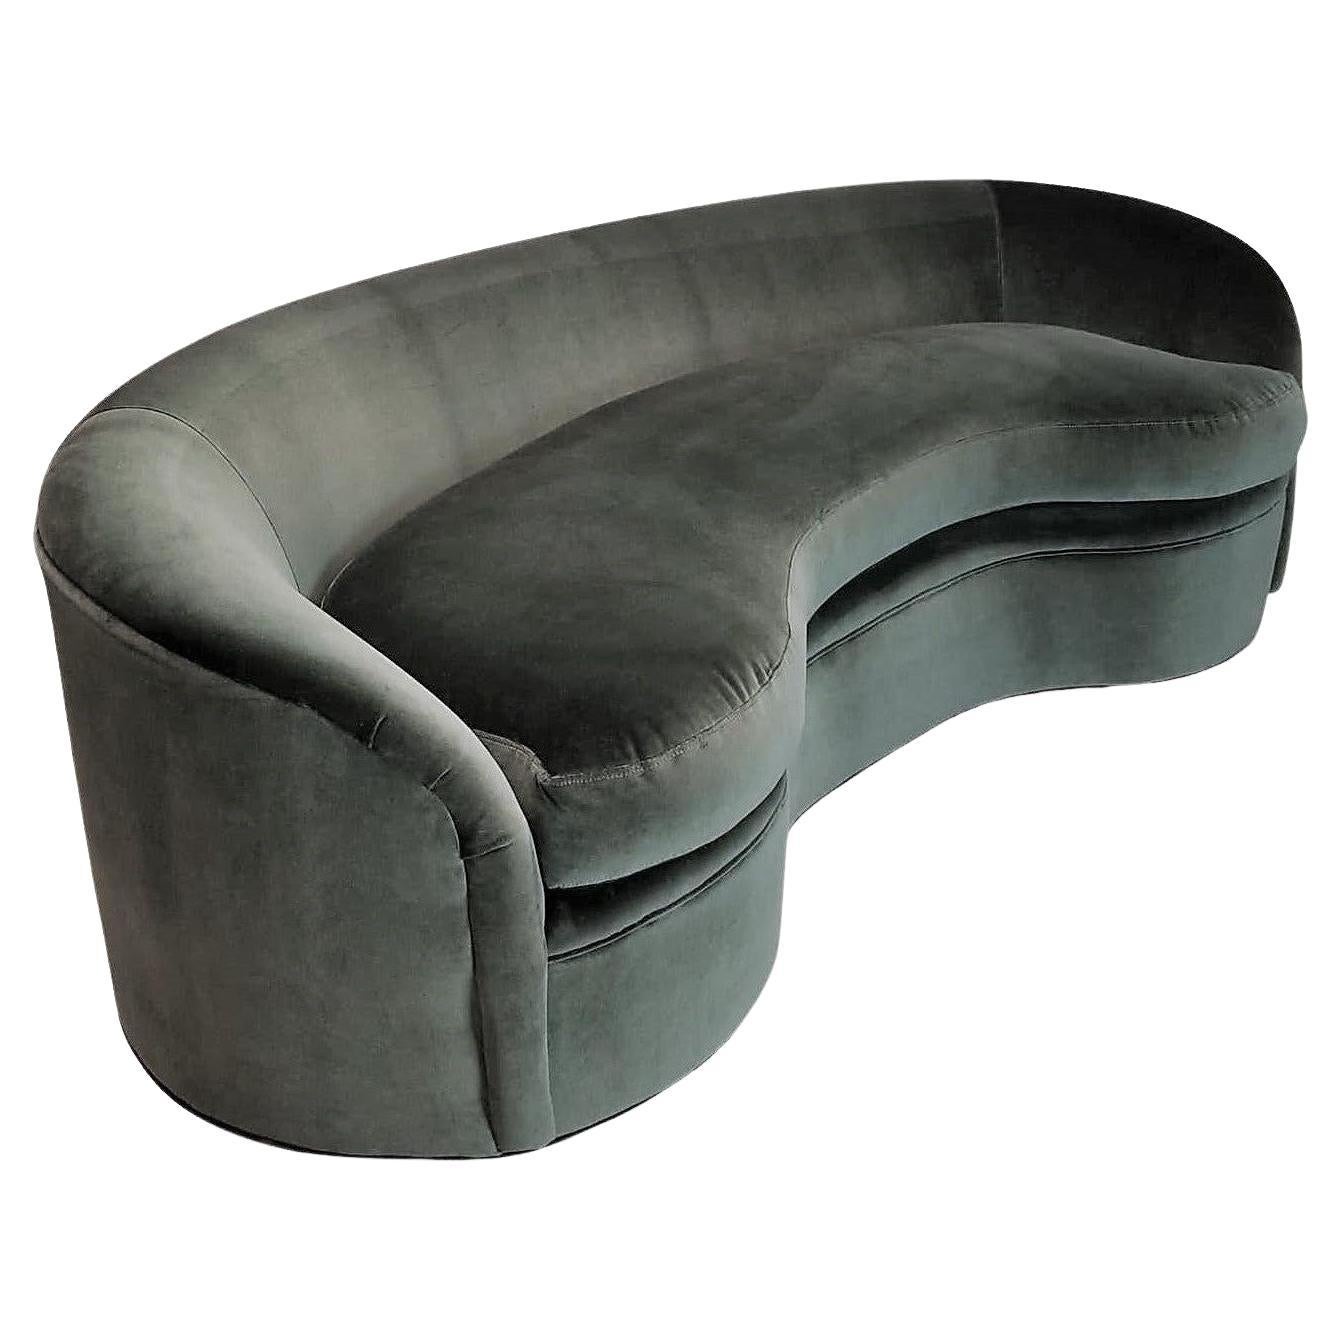 1980s Kagan Style Biomorphic Form Sofa by Directional Furniture